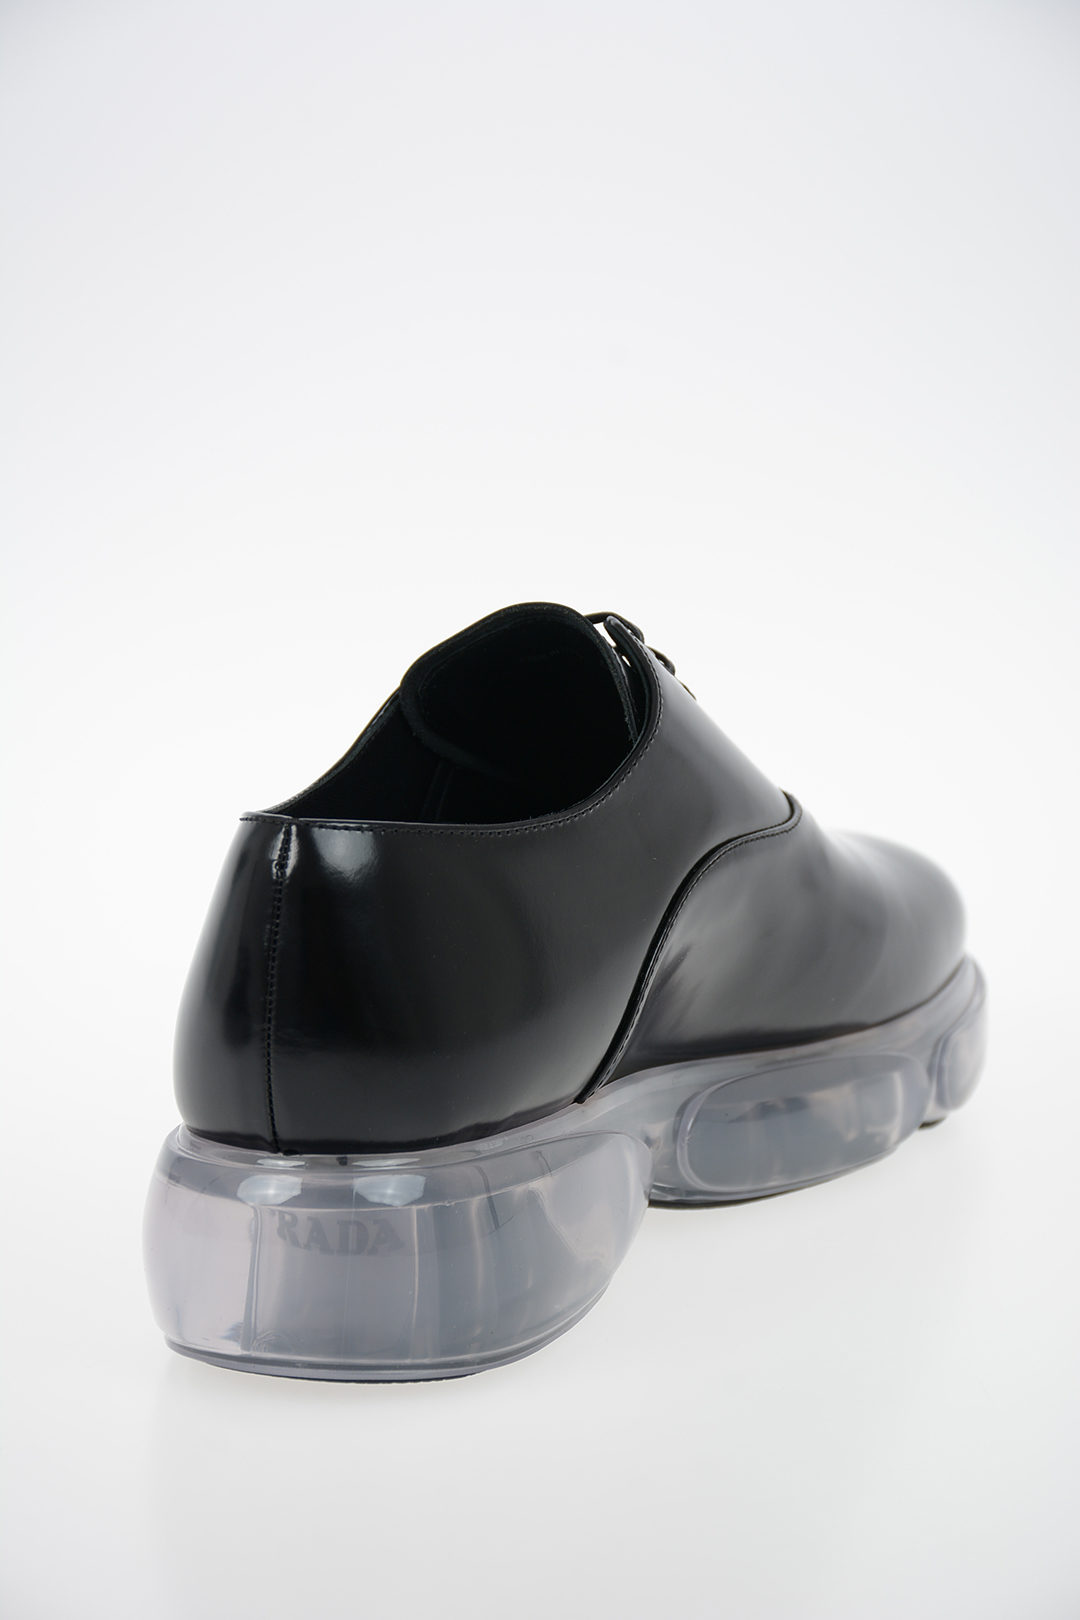 Prada Brushed Leather Derby Shoes women - Glamood Outlet